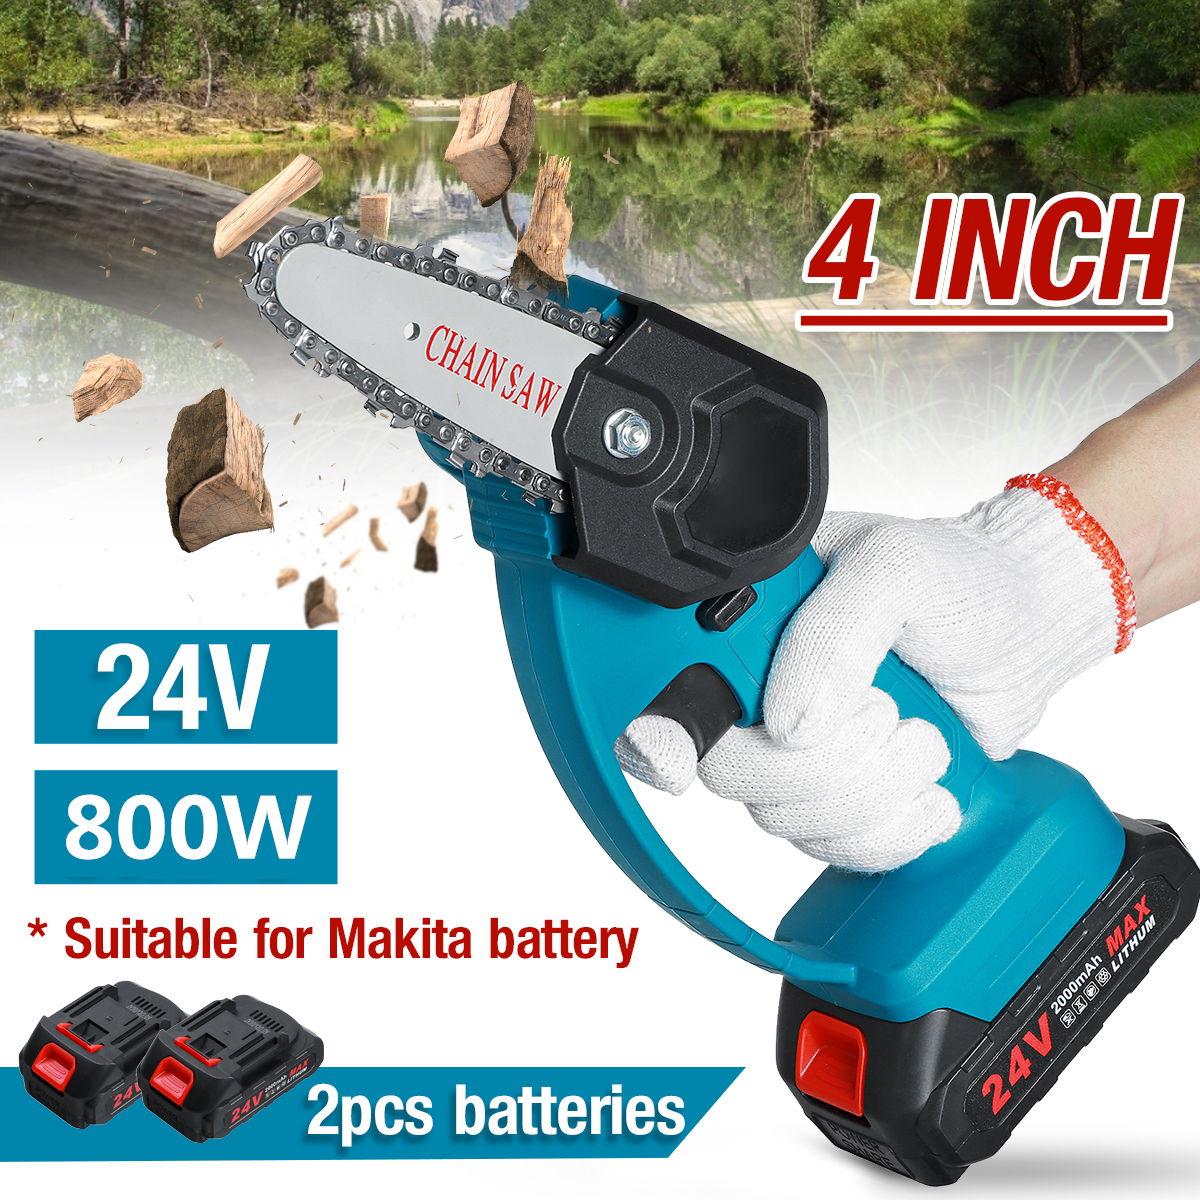 24V-Electric-Chain-Saw-4-Inch-Mini-Chainsaw-Woodworking-Pruning-Garden-Power-Tool-W-1-or-2-Battery-F-1797383-1